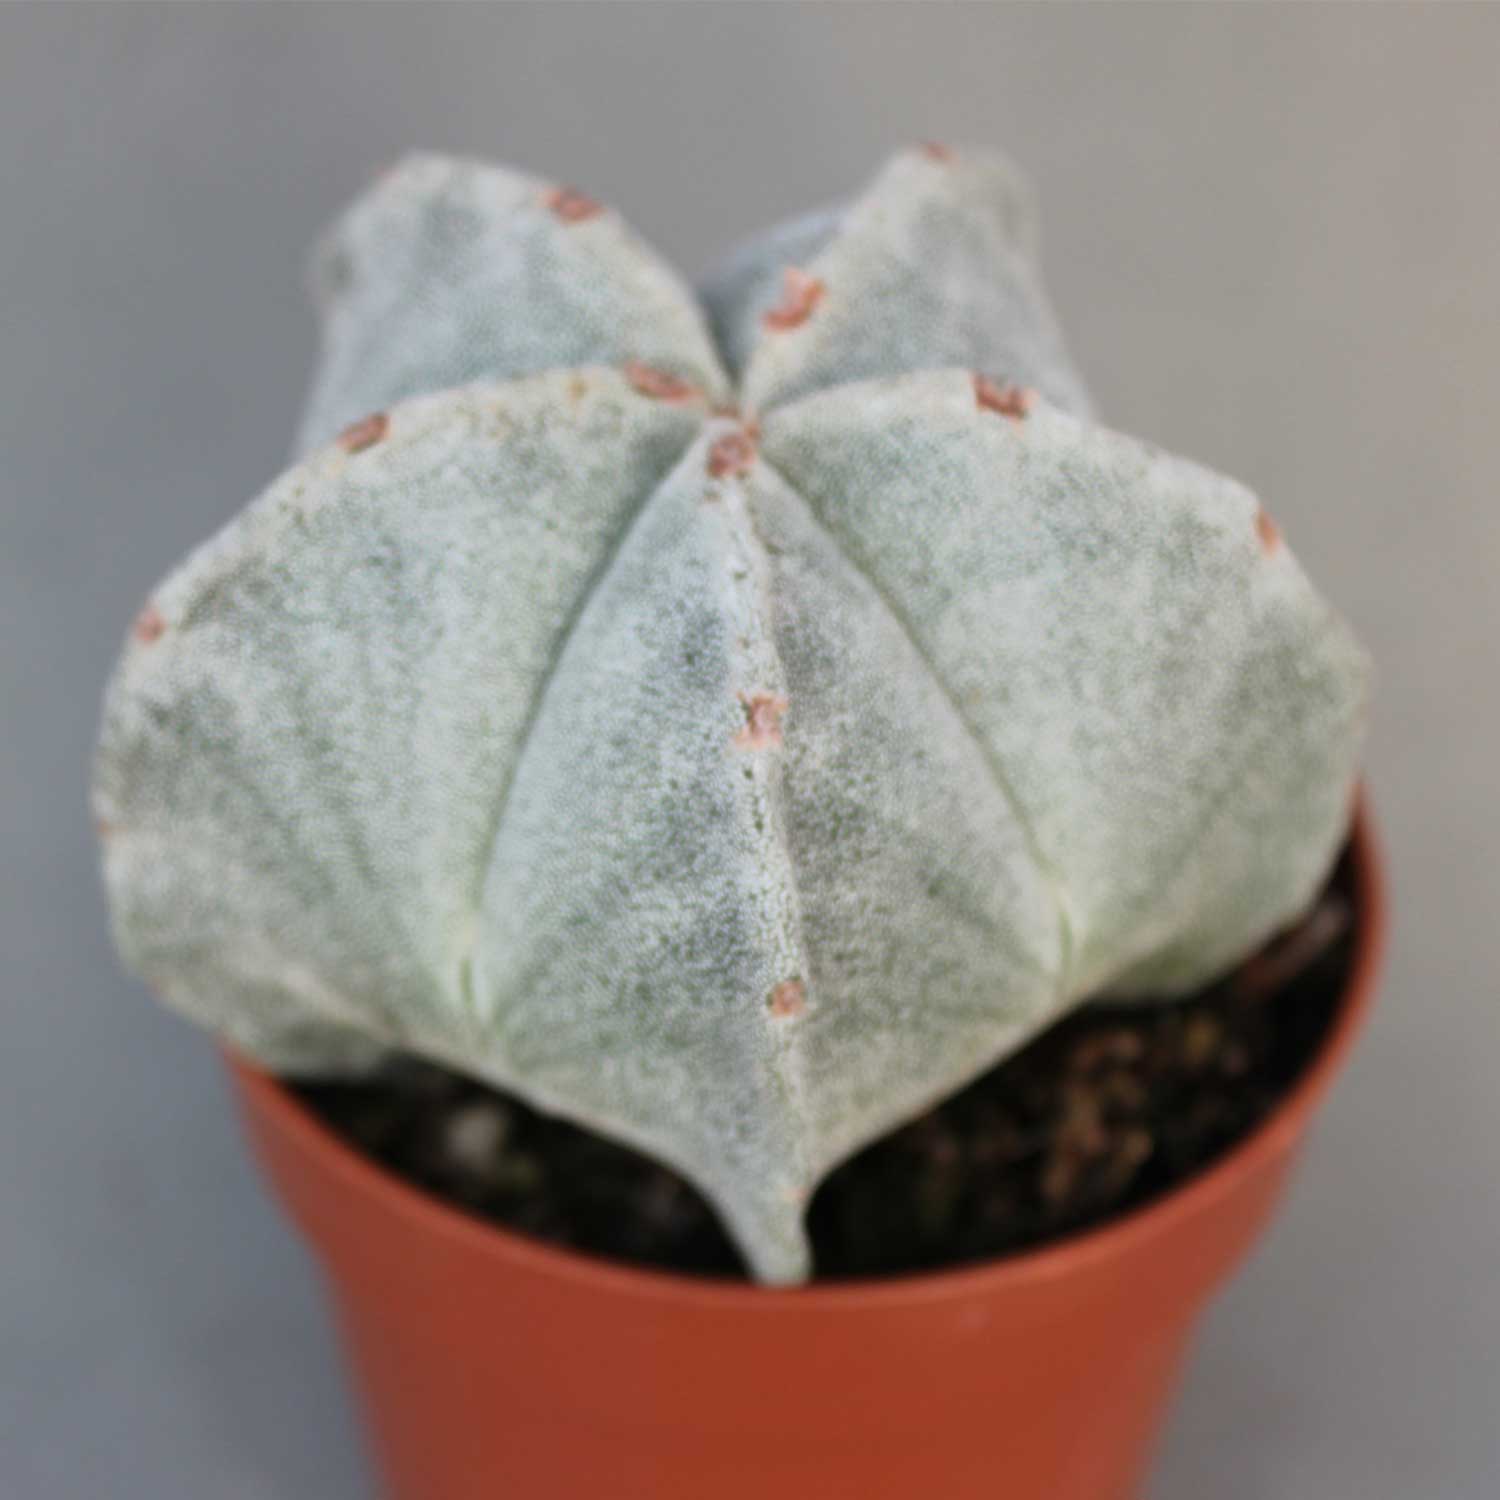 You are currently viewing Astrophytum myriostigma